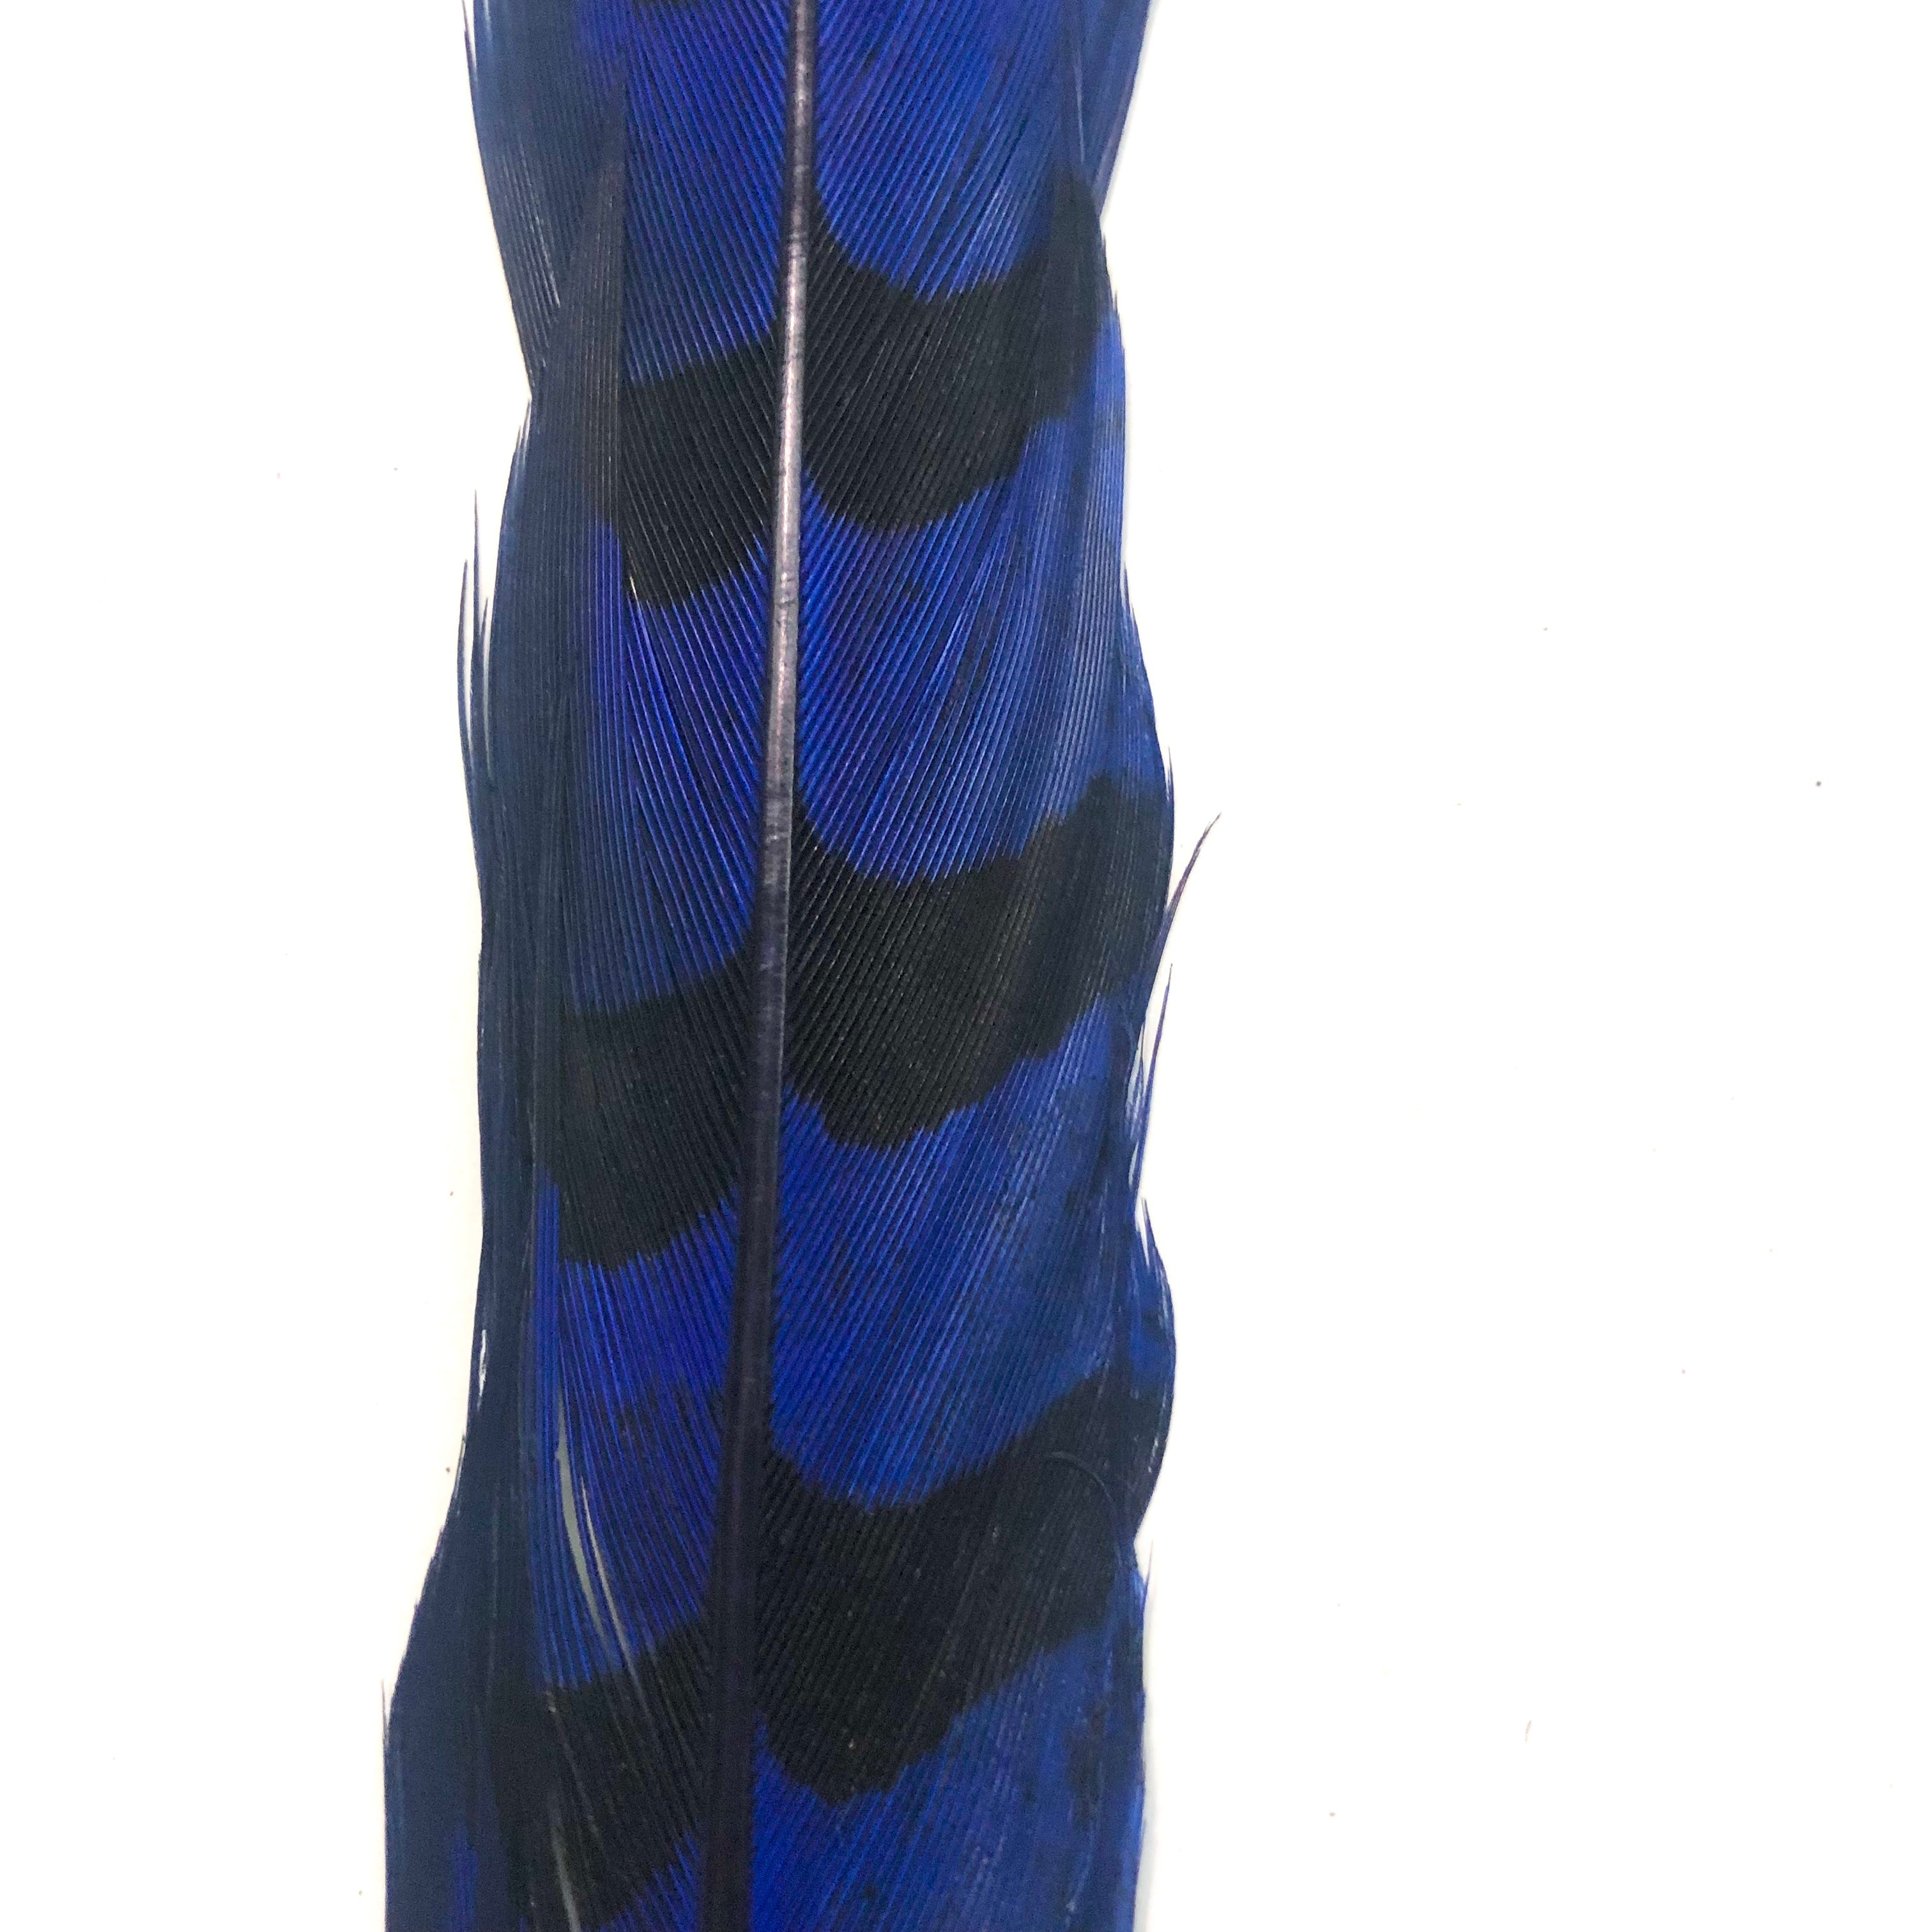 18" to 20" Reeves Pheasant Tail Feather - Royal Blue